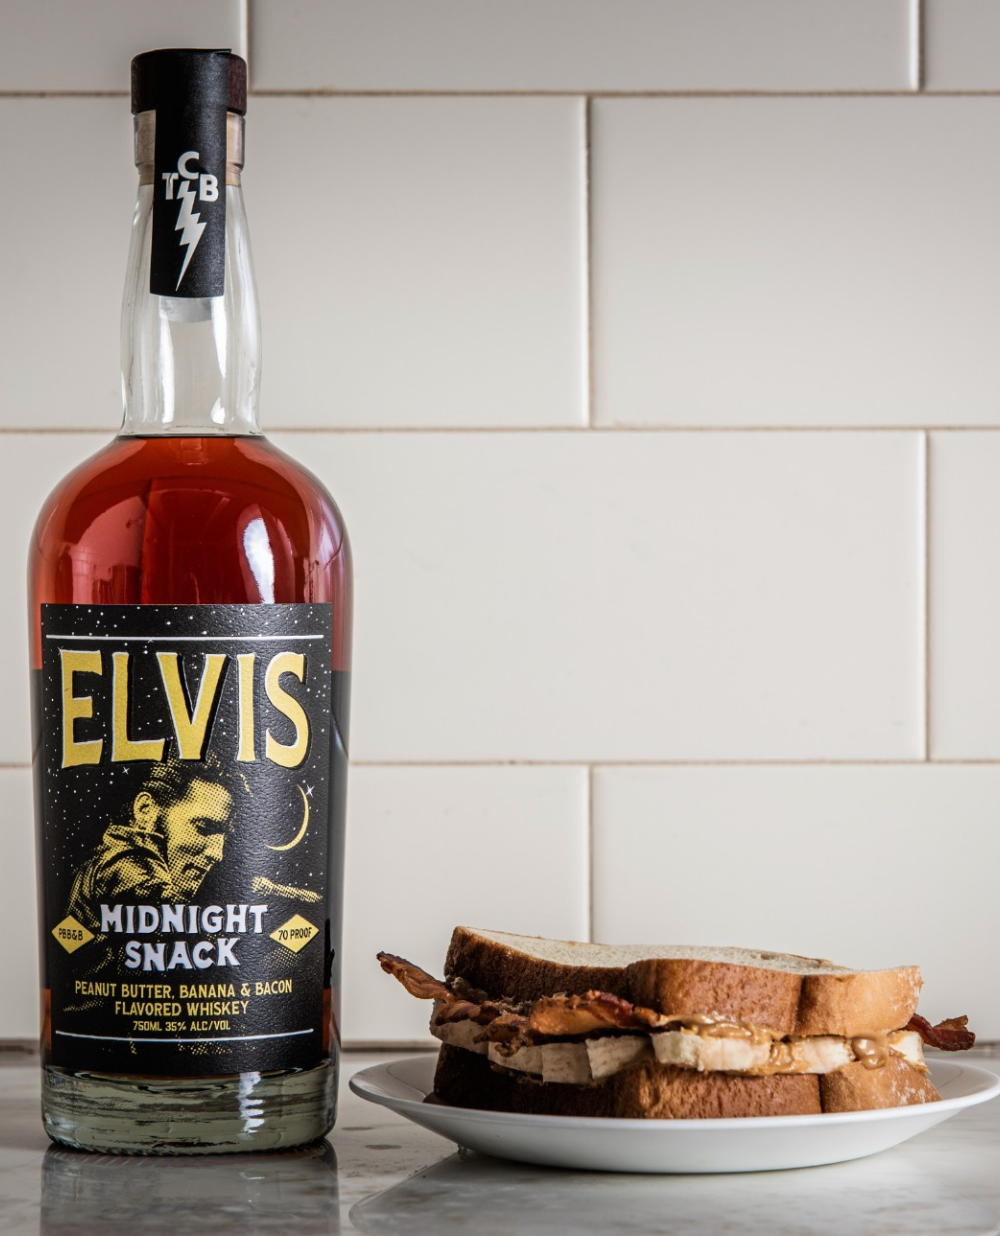 Elvis Midnight Snack Whiskey (Peanut Butter Banana and Bacon Flavored)